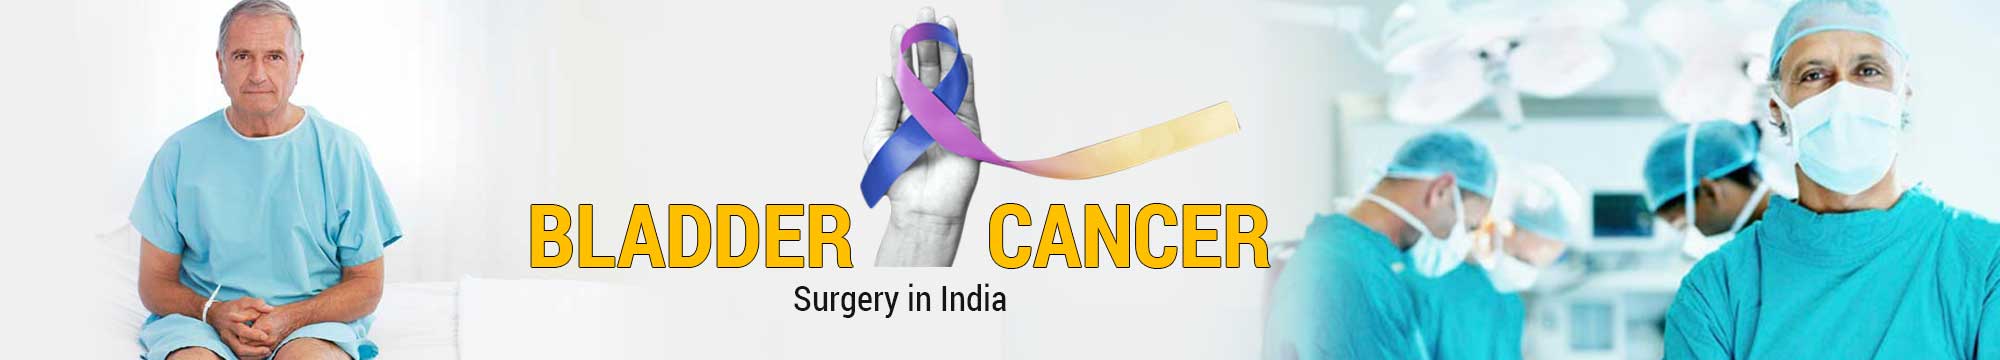 Bladder Cancer Surgery in India